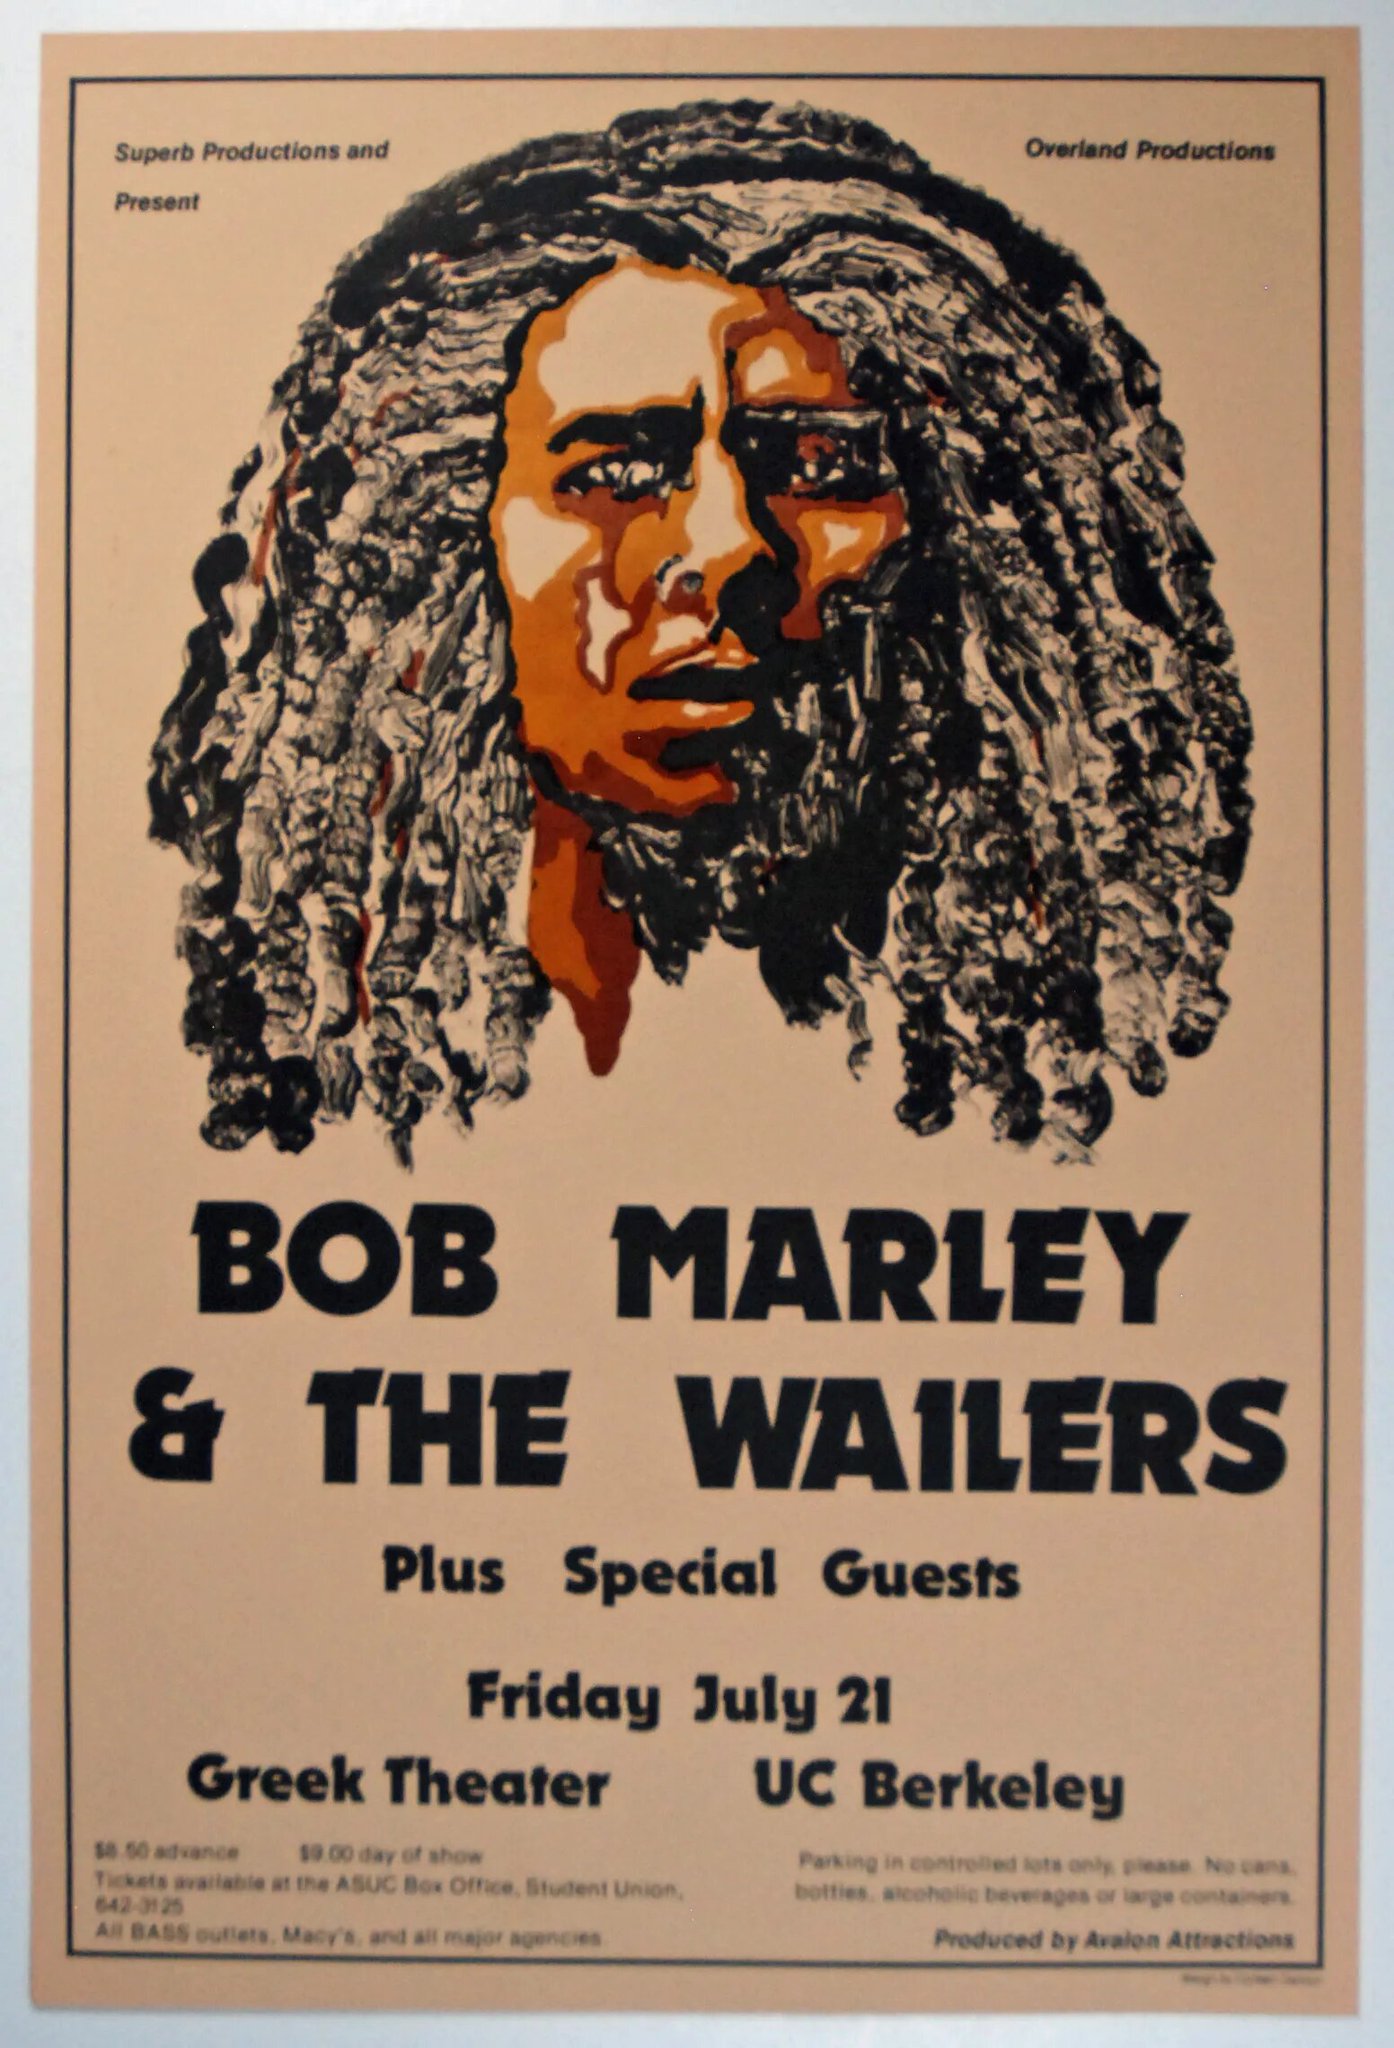 Happy birthday, Bob Marley. The musical legend would have been 77 years old today.  
 